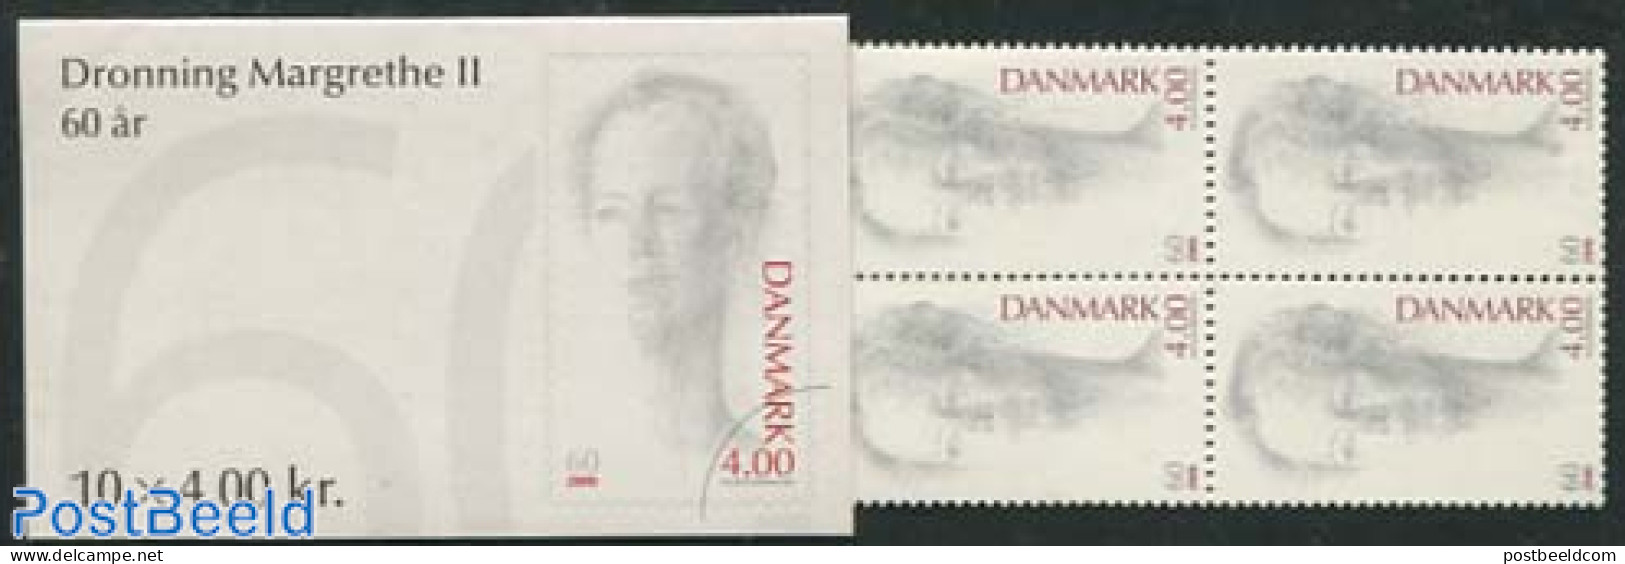 Denmark 2000 Queen Margrethe II Birthday Booklet, Mint NH, History - Kings & Queens (Royalty) - Stamp Booklets - Neufs